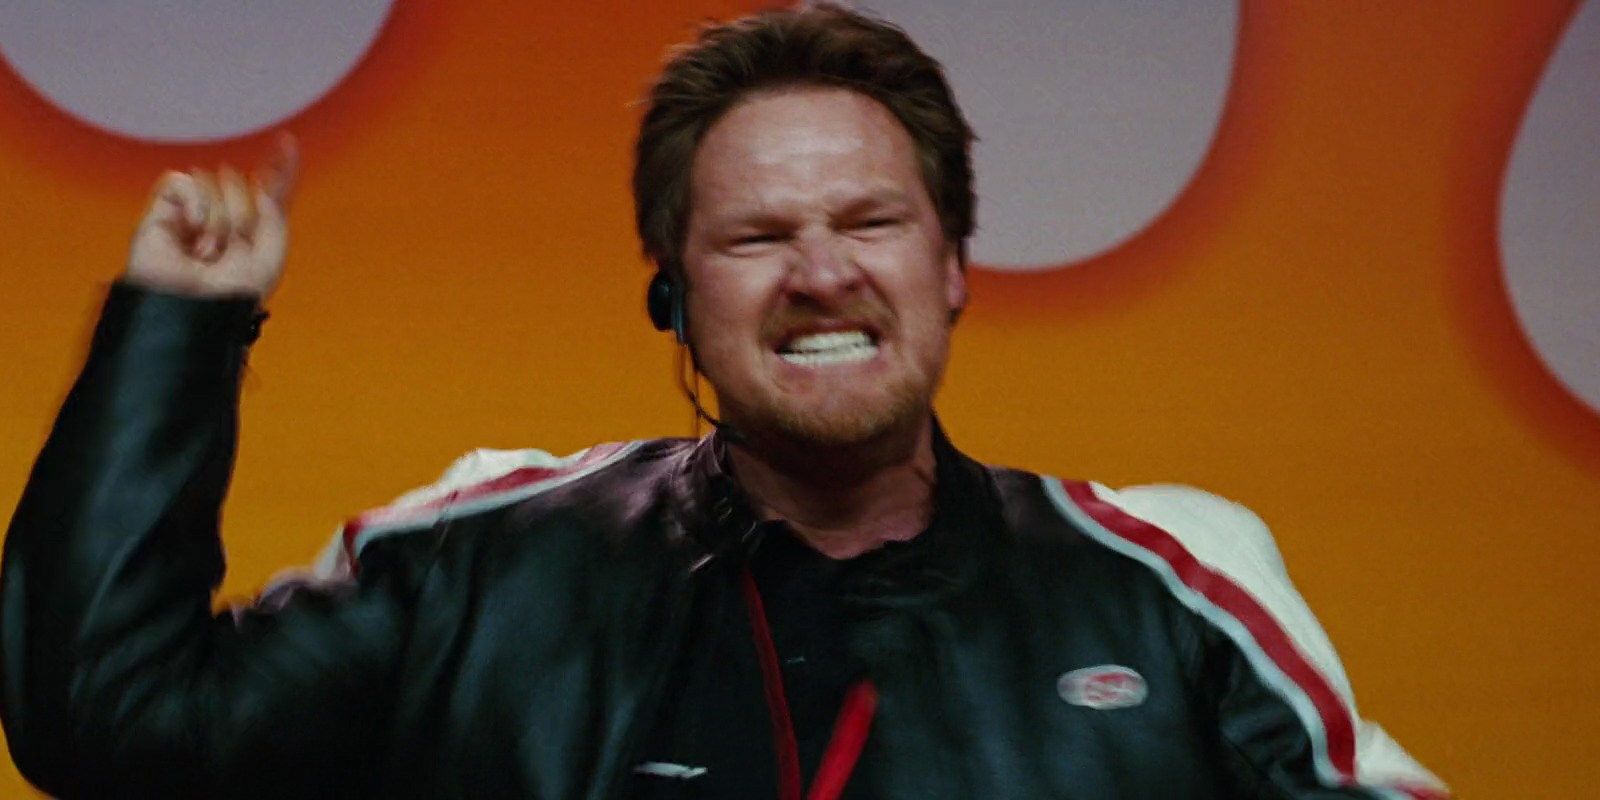 Donal Logue cheering on Nic Cage in Ghost Rider